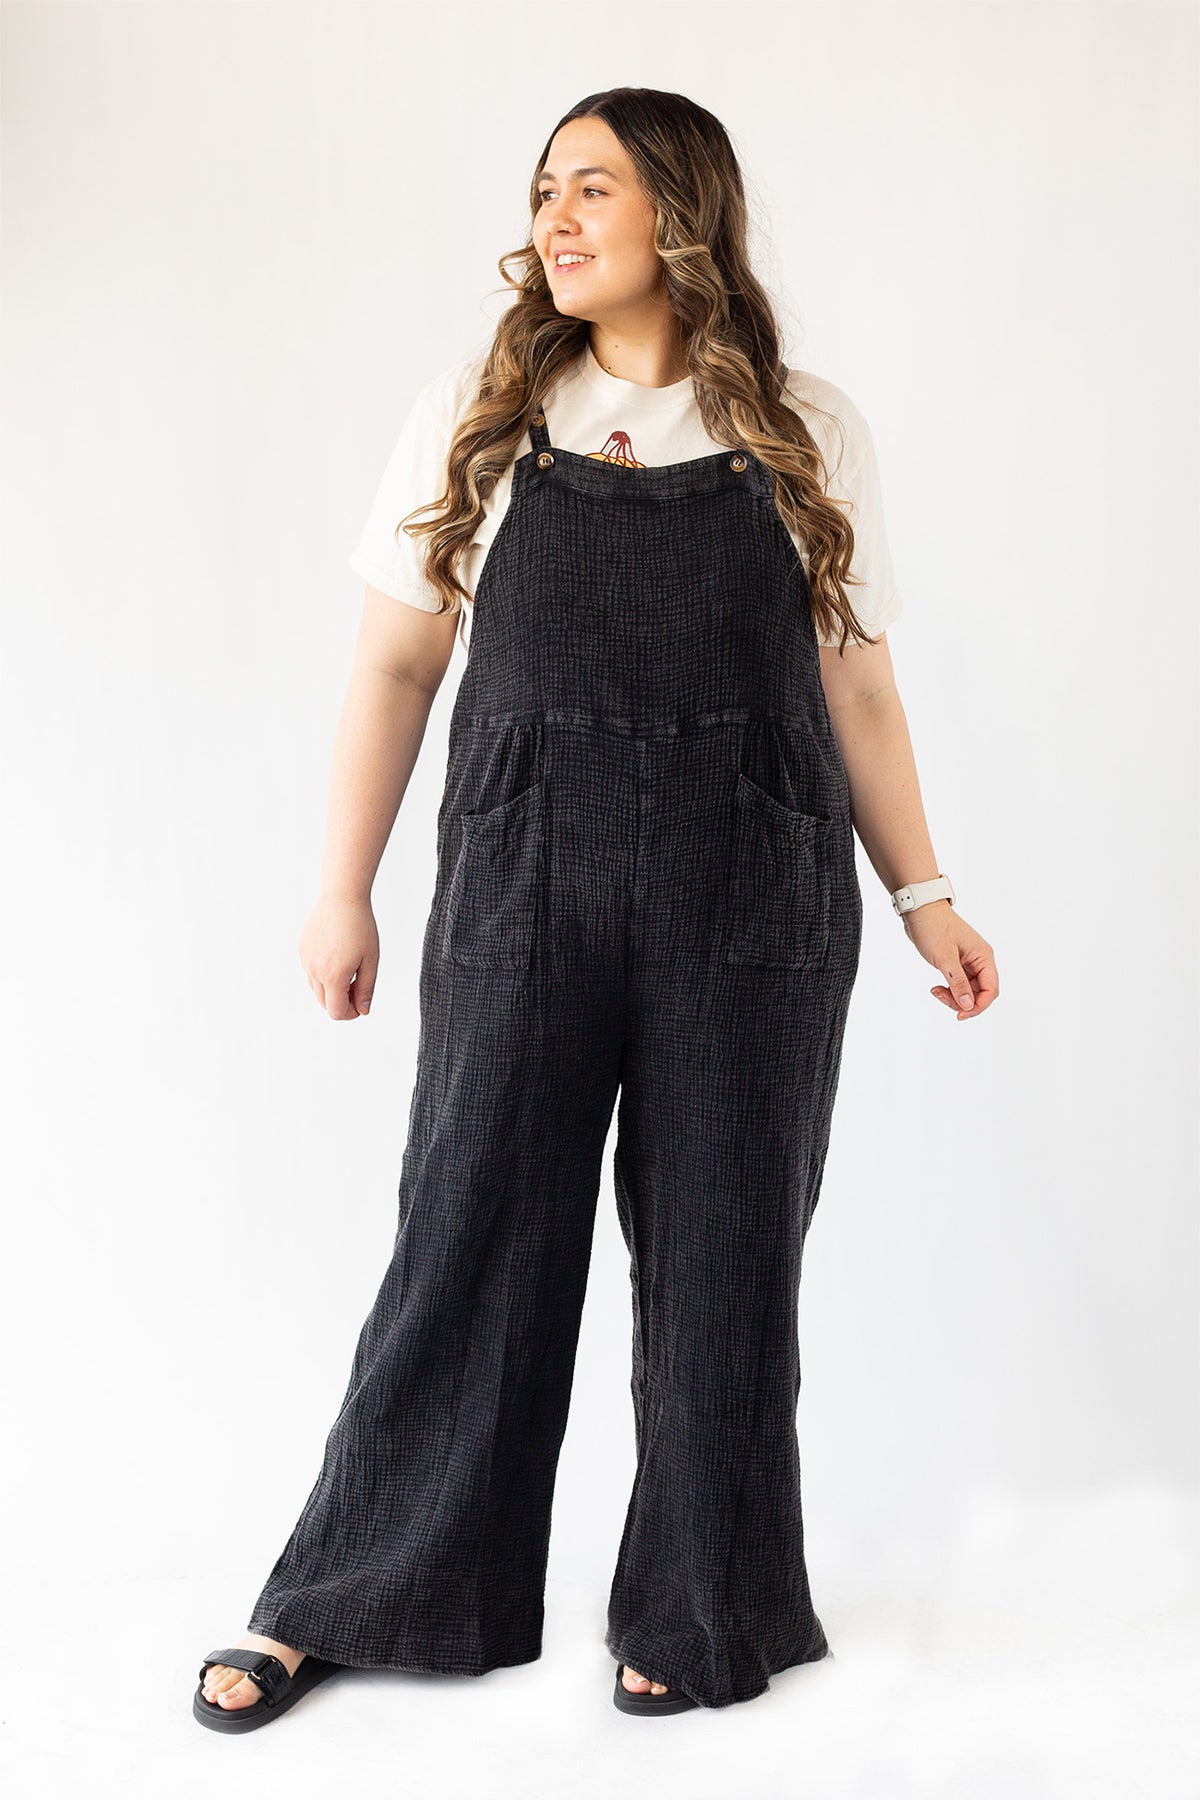 Mineral Washed Overalls